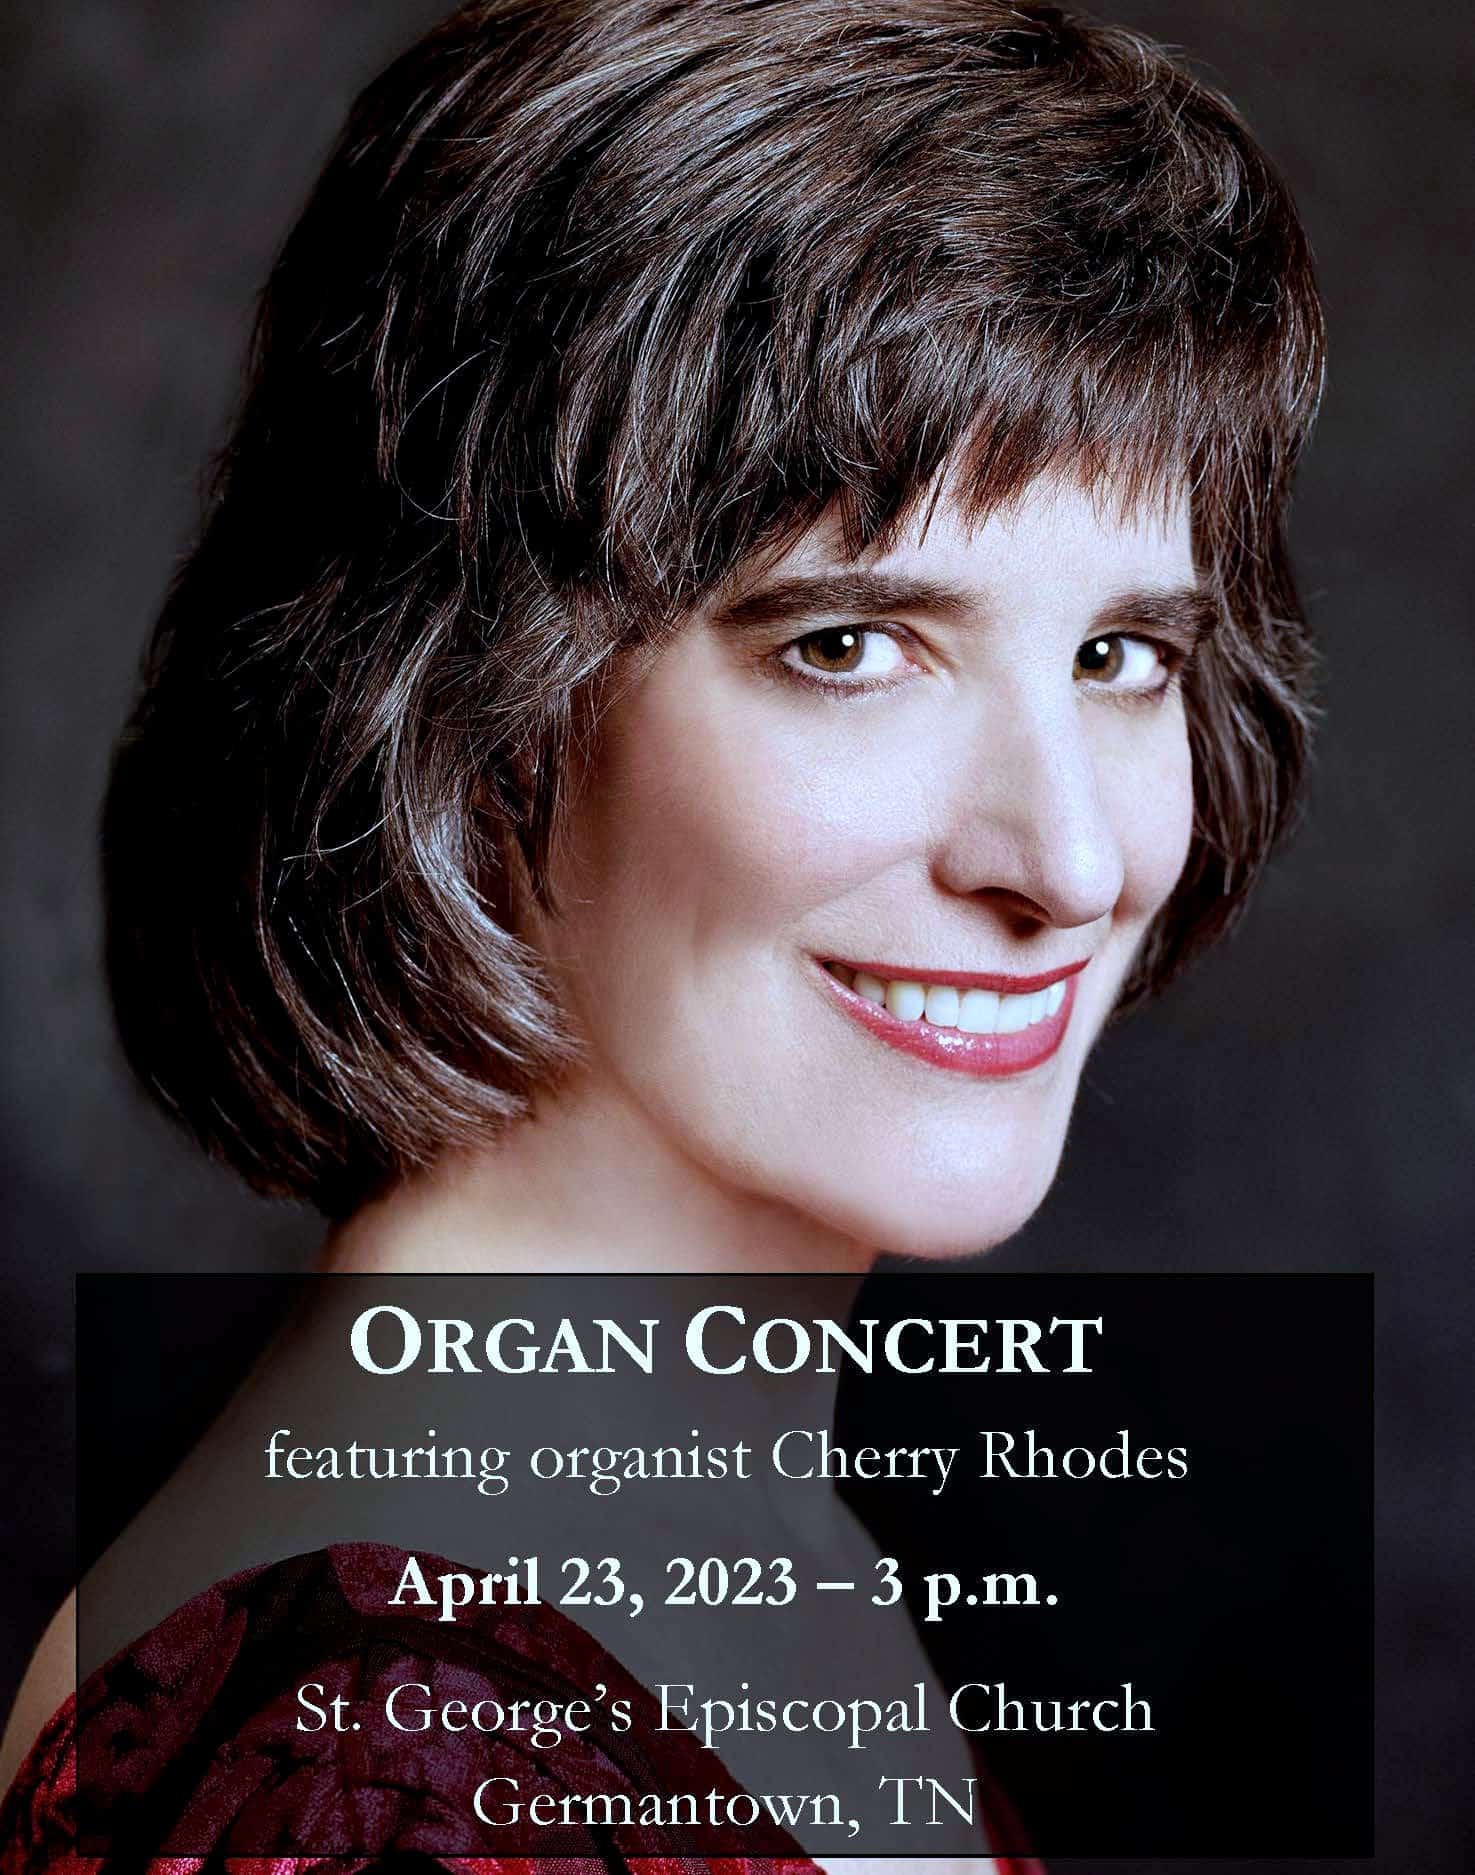 Promotion for Cherry Rhodes organ concert